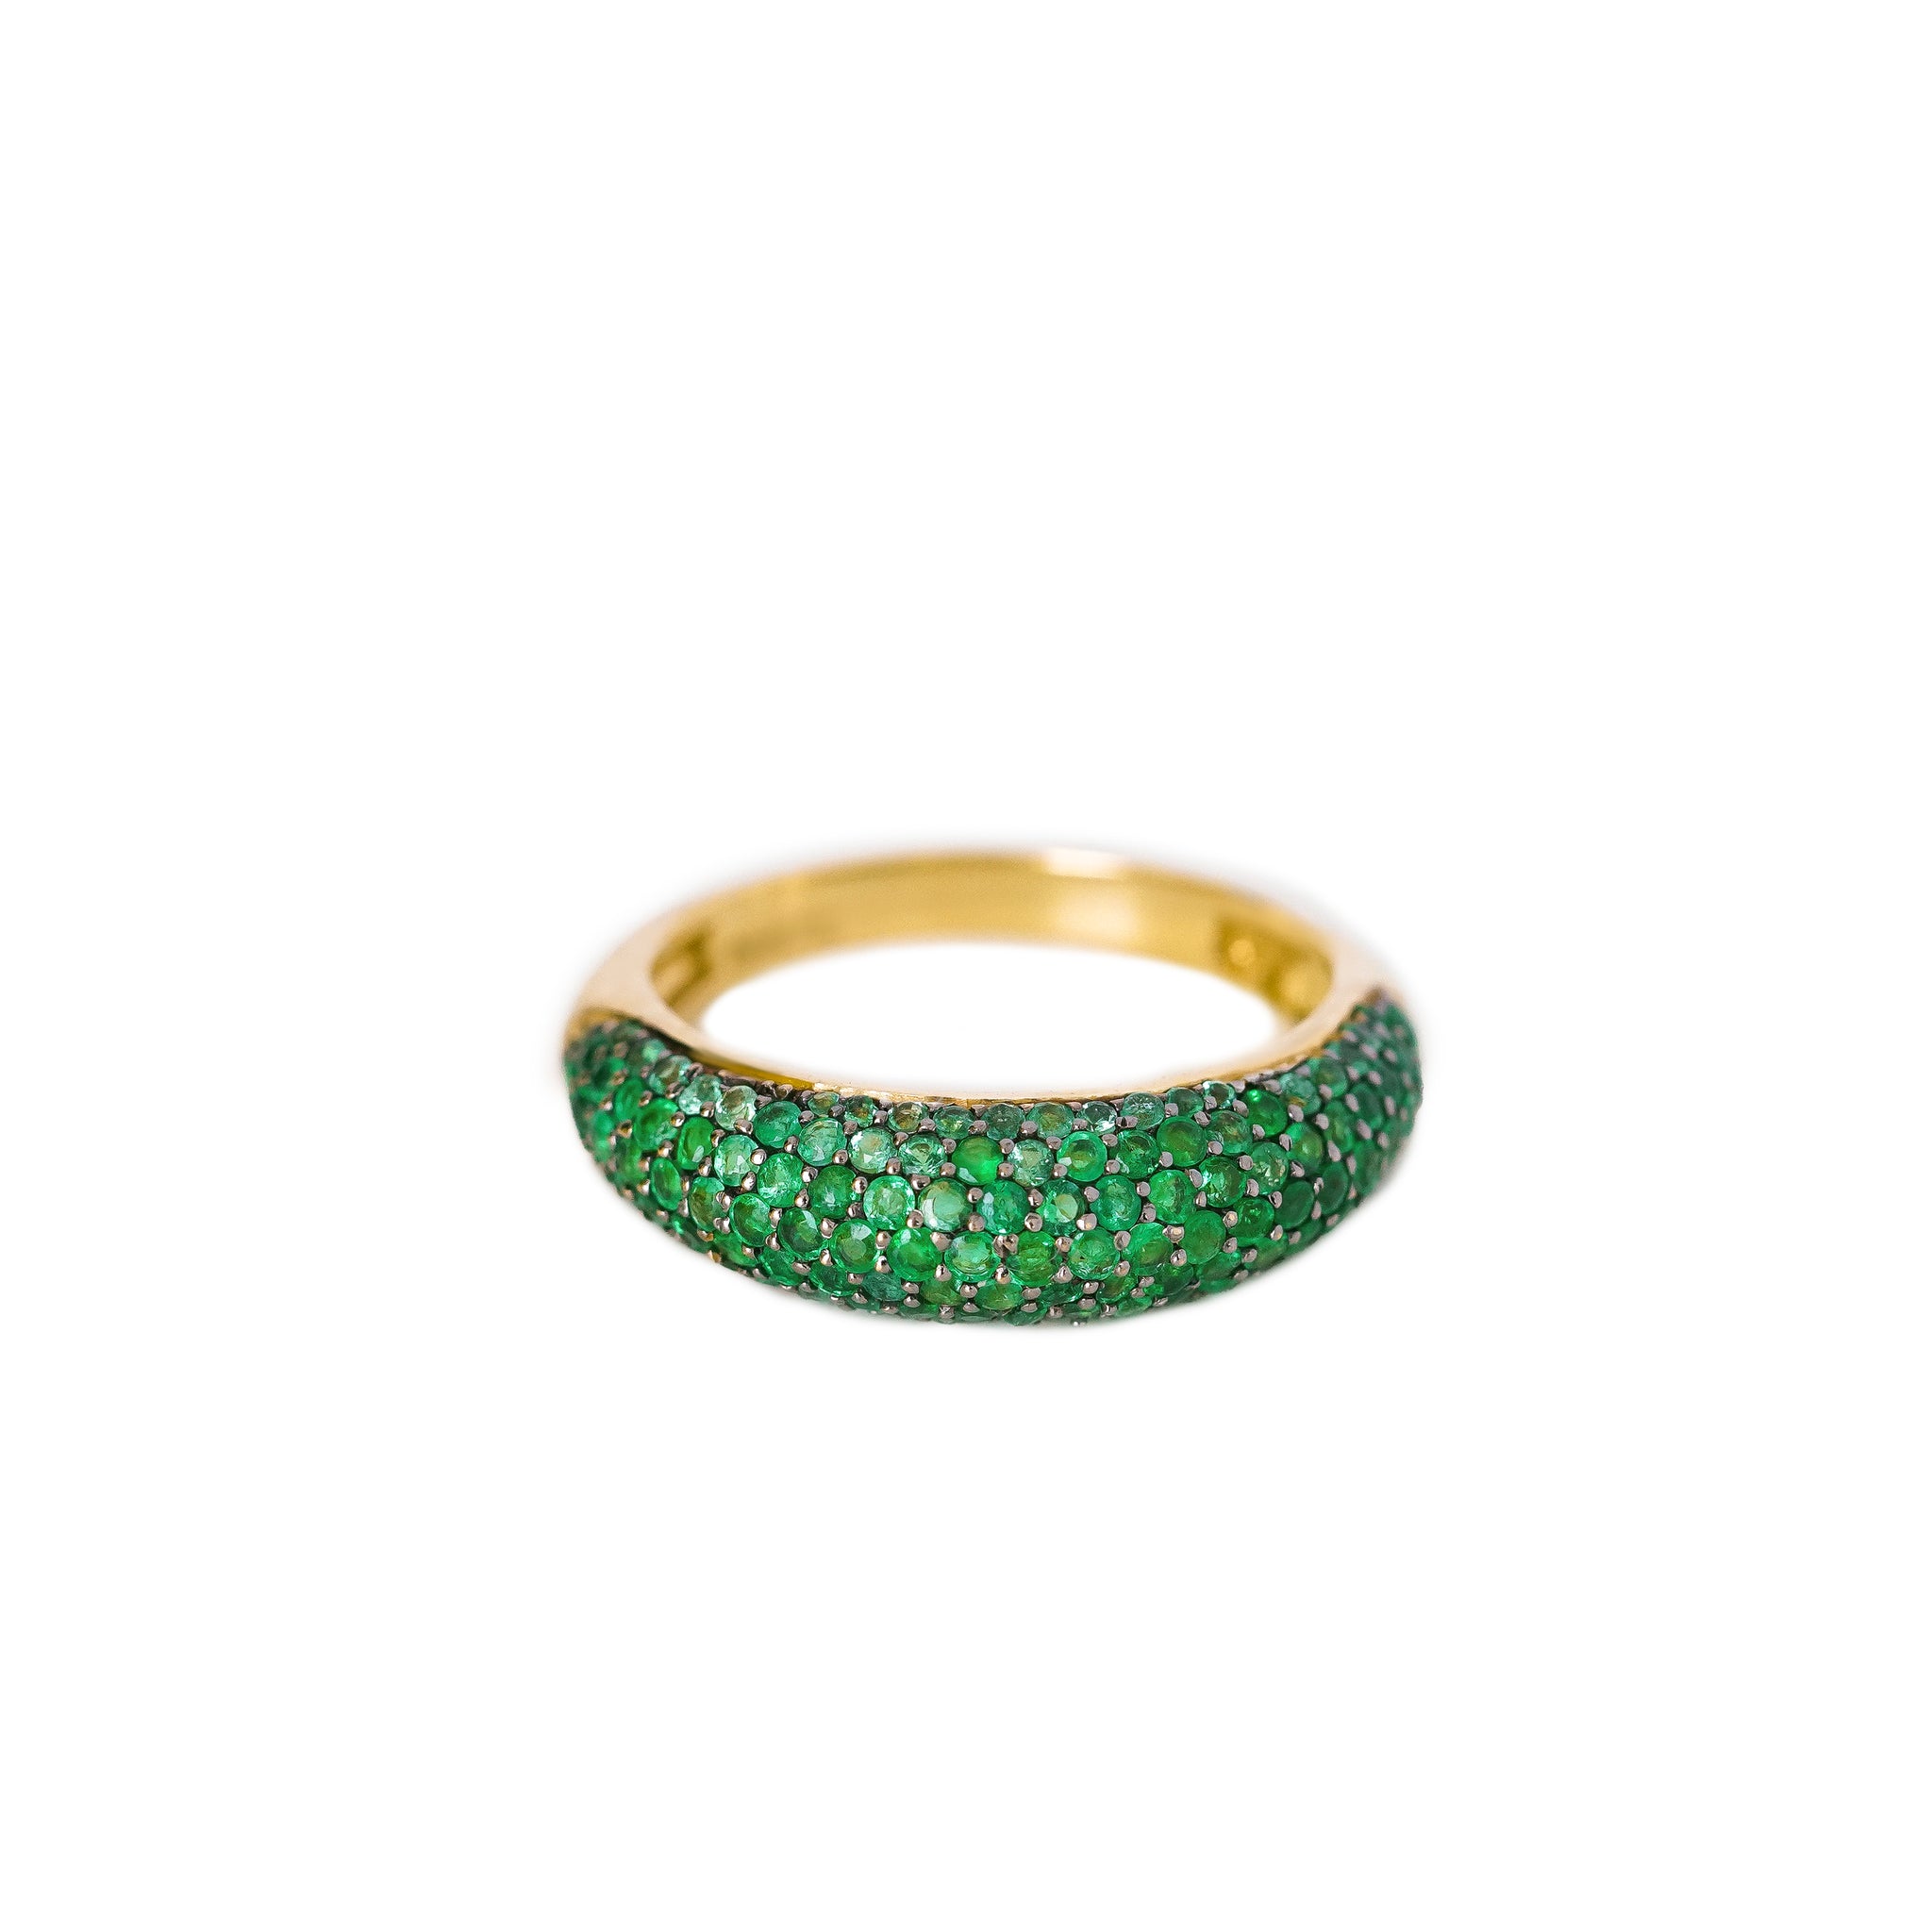 The Emeralds Dome Ring